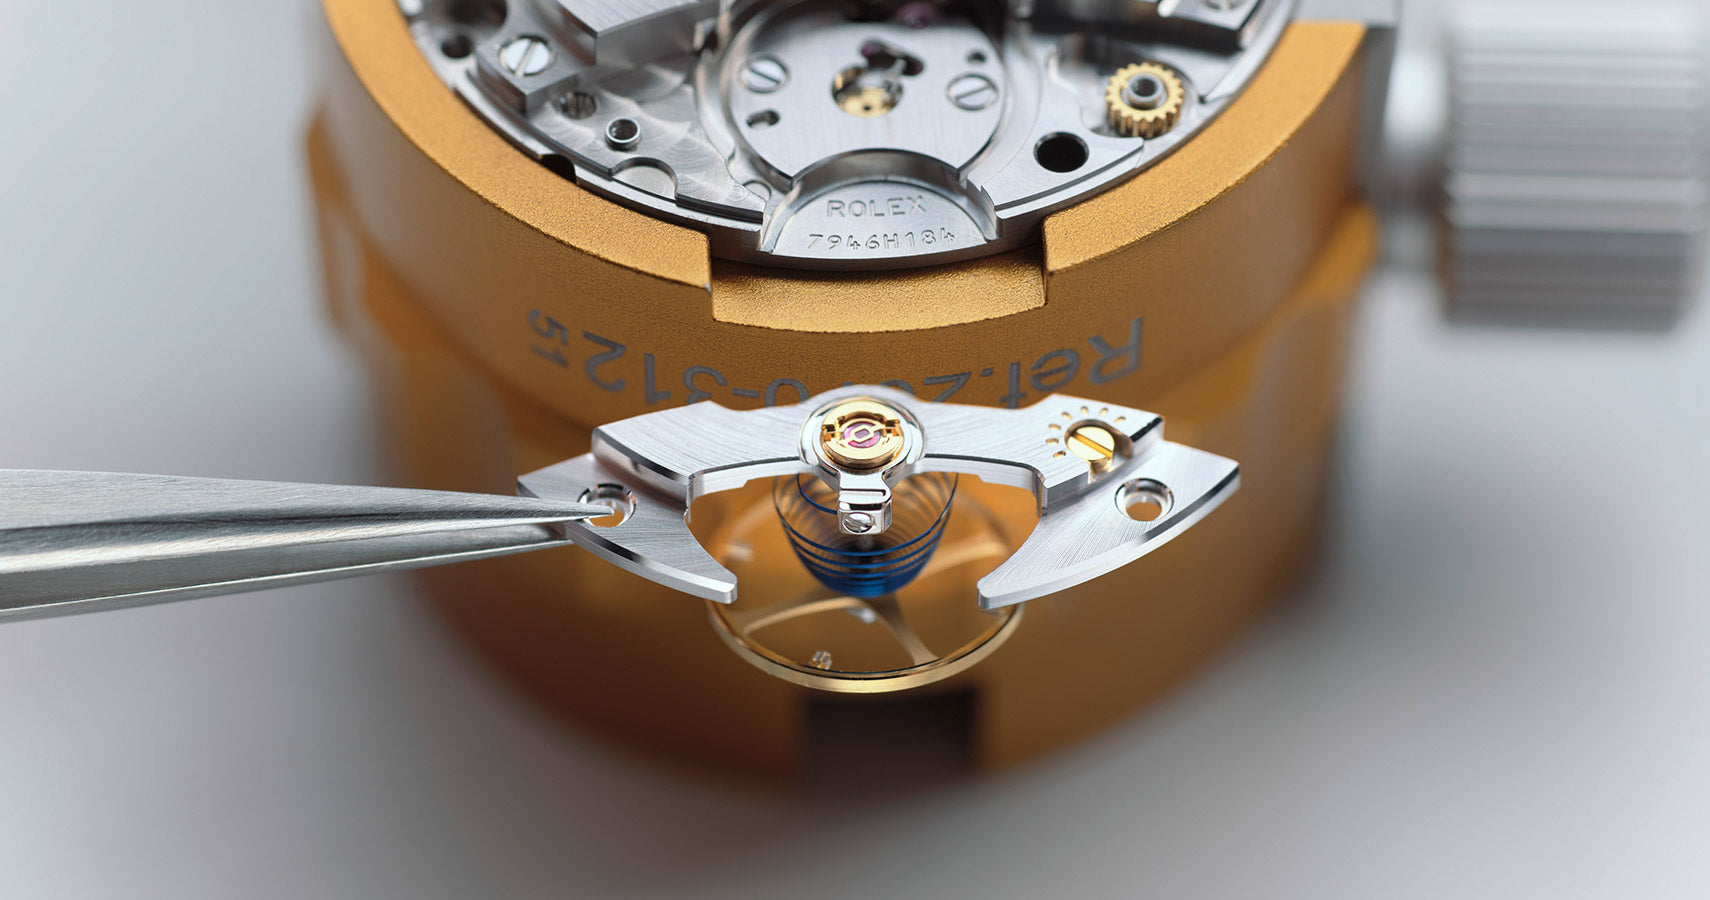 ASSEMBLY AND LUBRICATION OF THE ROLEX MOVEMENT